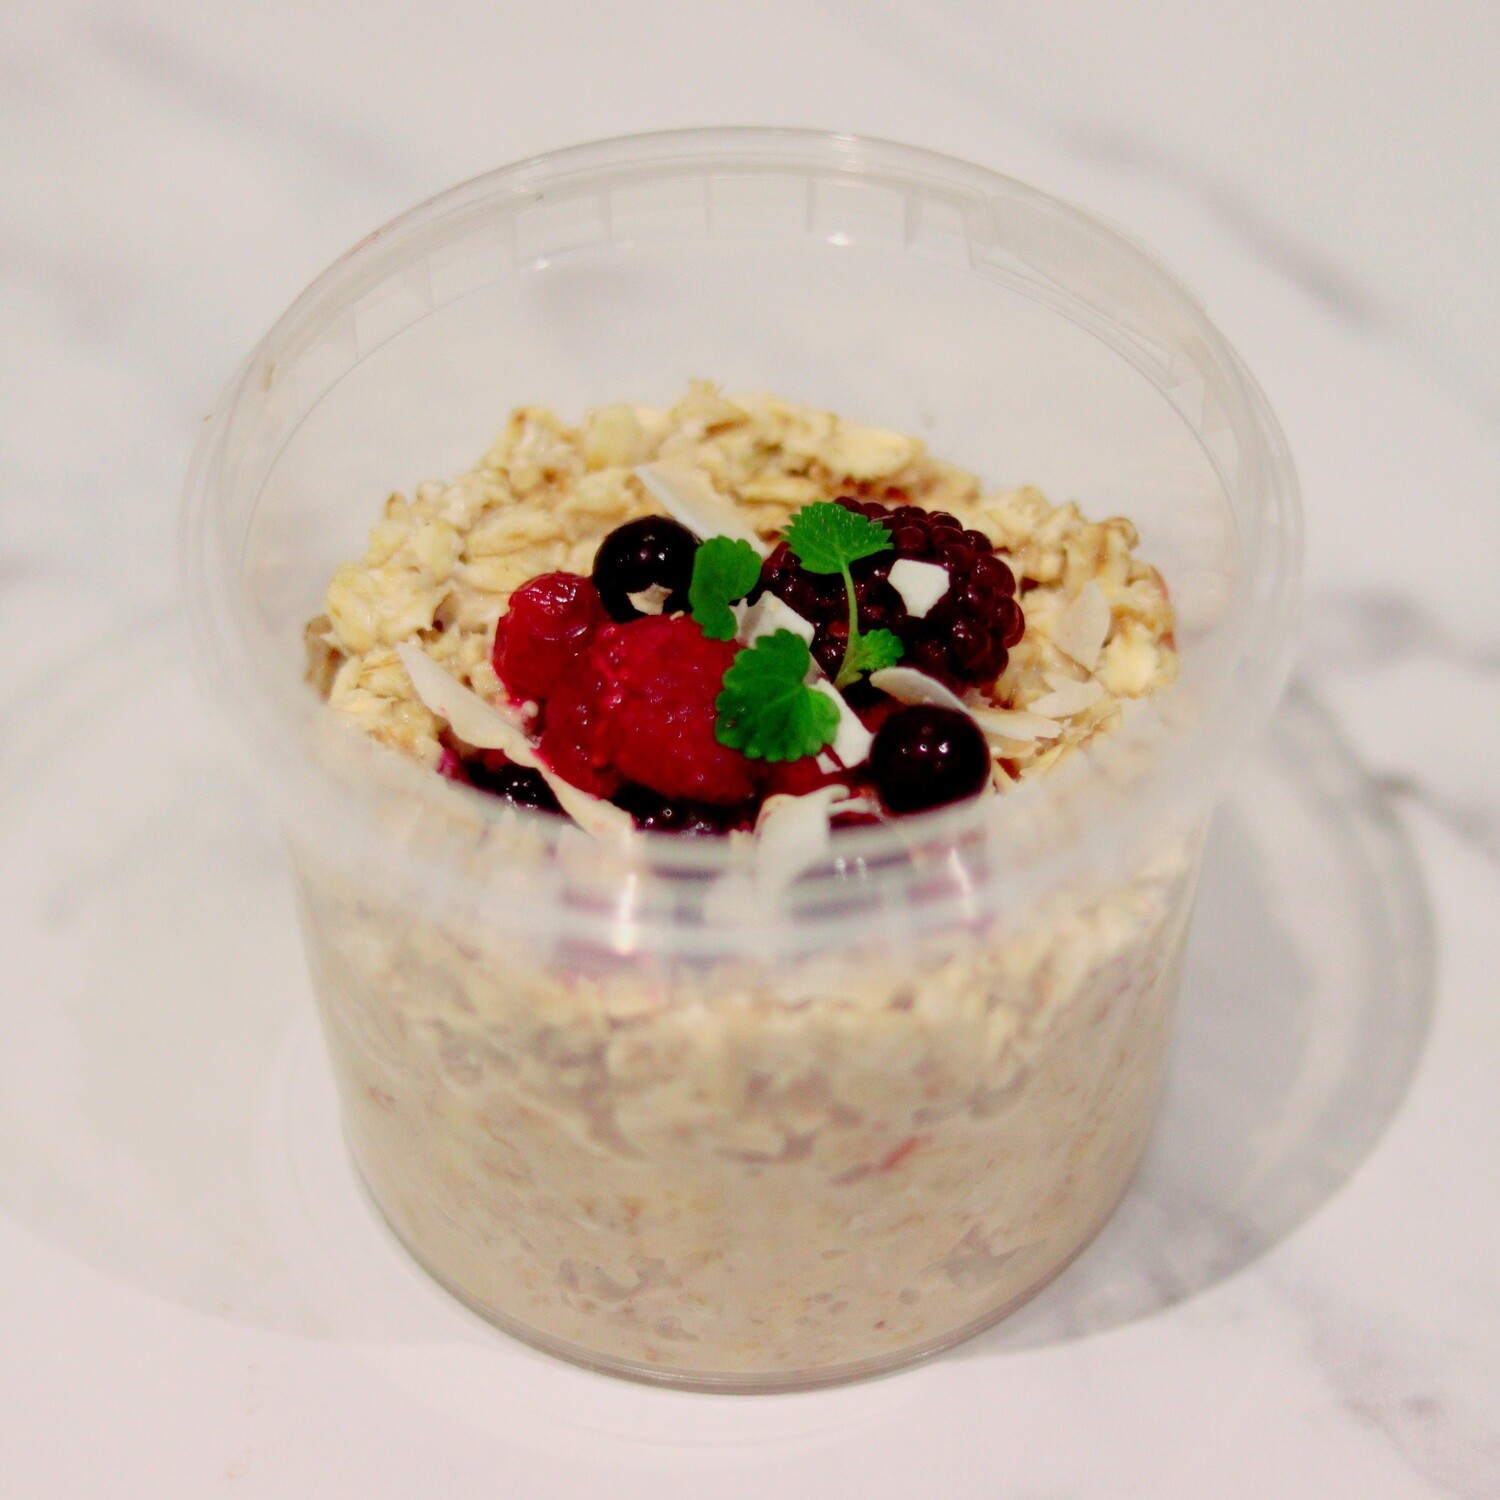 Overnight Oats Topped with Fresh Berries